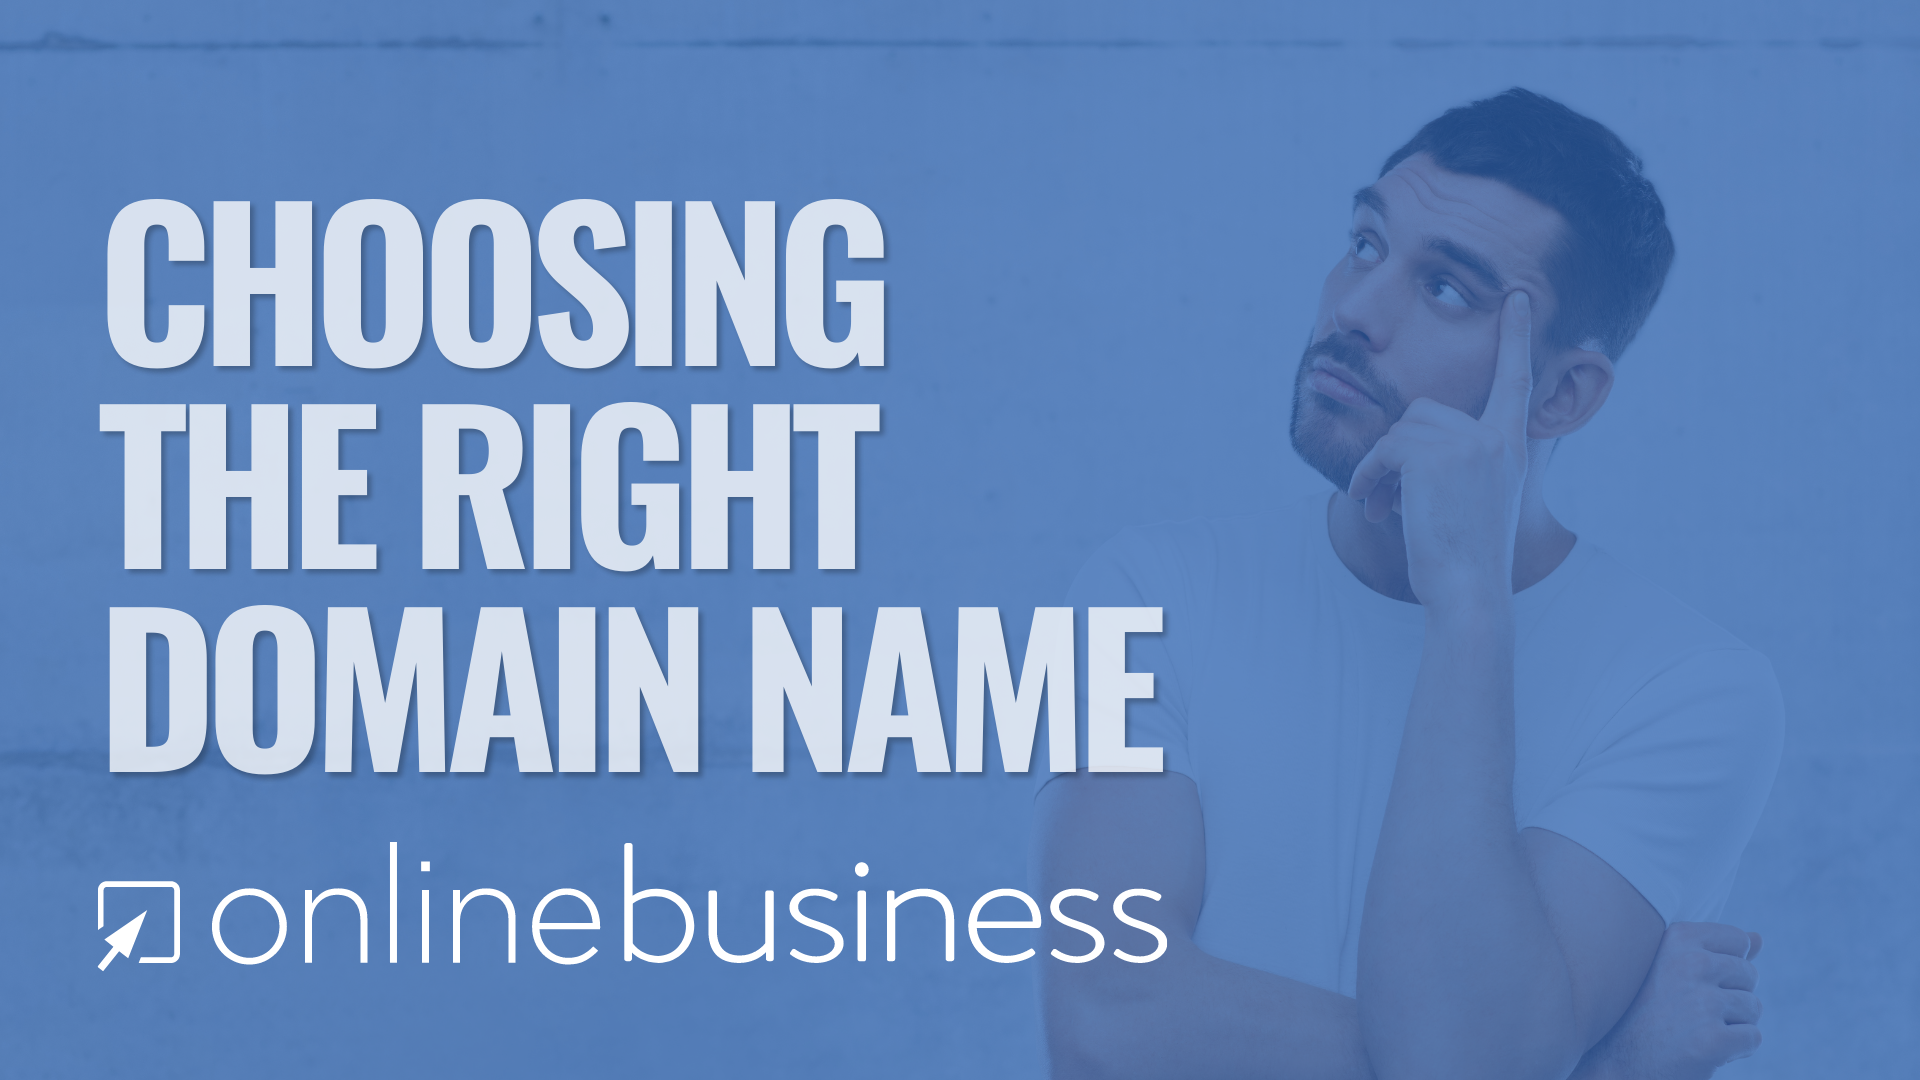 OnlineBusiness.com highlights why starting the right domain with the right company name